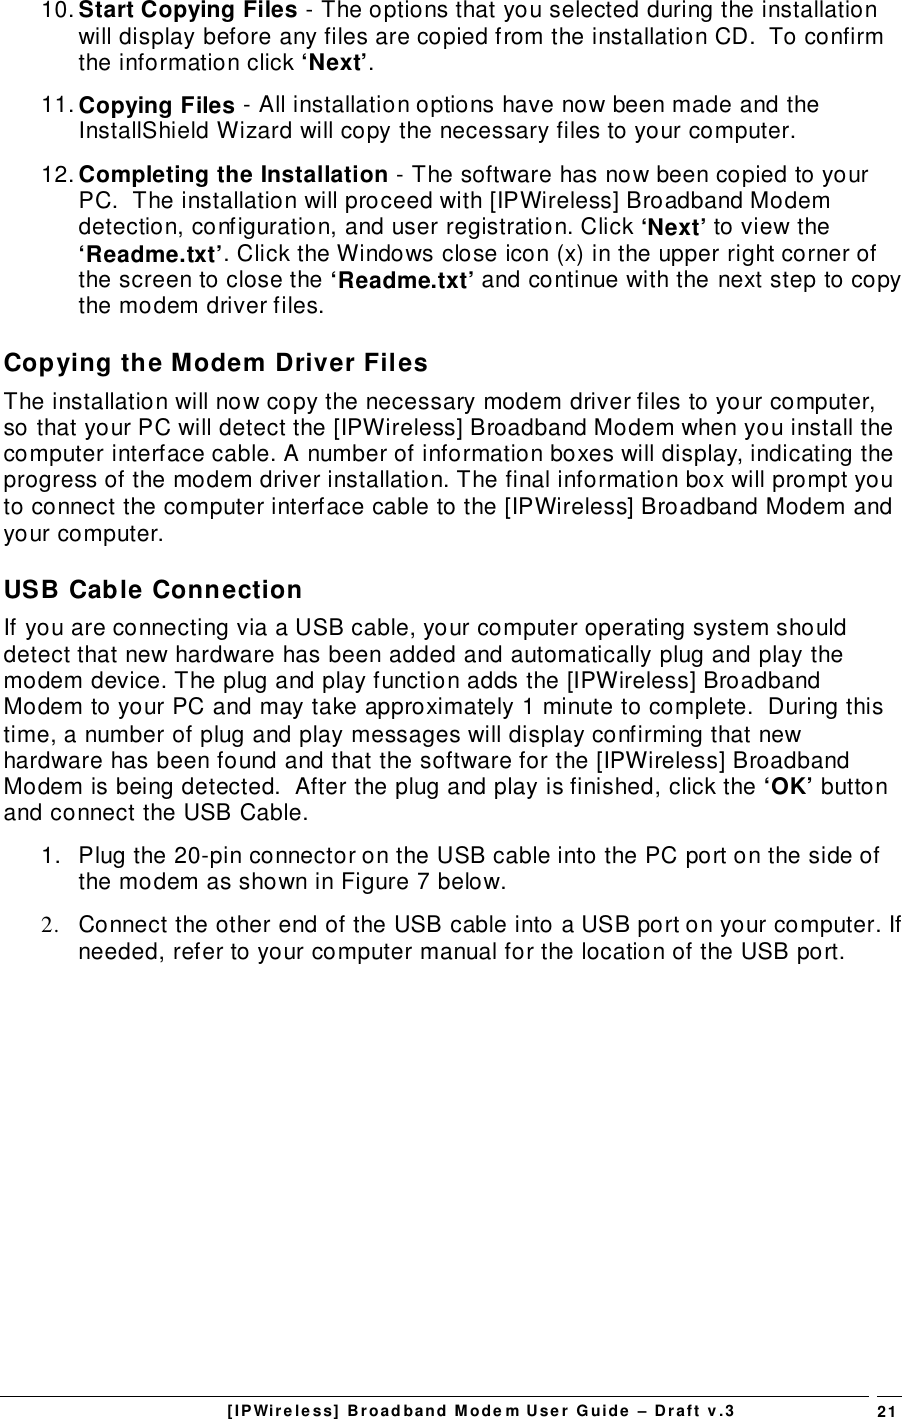 [IPWireless] Broadband Modem User Guide – Draft v.3 2110. Start Copying Files - The options that you selected during the installationwill display before any files are copied from the installation CD.  To confirmthe information click ‘Next’.11. Copying Files - All installation options have now been made and theInstallShield Wizard will copy the necessary files to your computer.12. Completing the Installation - The software has now been copied to yourPC.  The installation will proceed with [IPWireless] Broadband Modemdetection, configuration, and user registration. Click ‘Next’ to view the‘Readme.txt’. Click the Windows close icon (x) in the upper right corner ofthe screen to close the ‘Readme.txt’ and continue with the next step to copythe modem driver files.Copying the Modem Driver FilesThe installation will now copy the necessary modem driver files to your computer,so that your PC will detect the [IPWireless] Broadband Modem when you install thecomputer interface cable. A number of information boxes will display, indicating theprogress of the modem driver installation. The final information box will prompt youto connect the computer interface cable to the [IPWireless] Broadband Modem andyour computer.USB Cable ConnectionIf you are connecting via a USB cable, your computer operating system shoulddetect that new hardware has been added and automatically plug and play themodem device. The plug and play function adds the [IPWireless] BroadbandModem to your PC and may take approximately 1 minute to complete.  During thistime, a number of plug and play messages will display confirming that newhardware has been found and that the software for the [IPWireless] BroadbandModem is being detected.  After the plug and play is finished, click the ‘OK’ buttonand connect the USB Cable.1.  Plug the 20-pin connector on the USB cable into the PC port on the side ofthe modem as shown in Figure 7 below.2.  Connect the other end of the USB cable into a USB port on your computer. Ifneeded, refer to your computer manual for the location of the USB port.